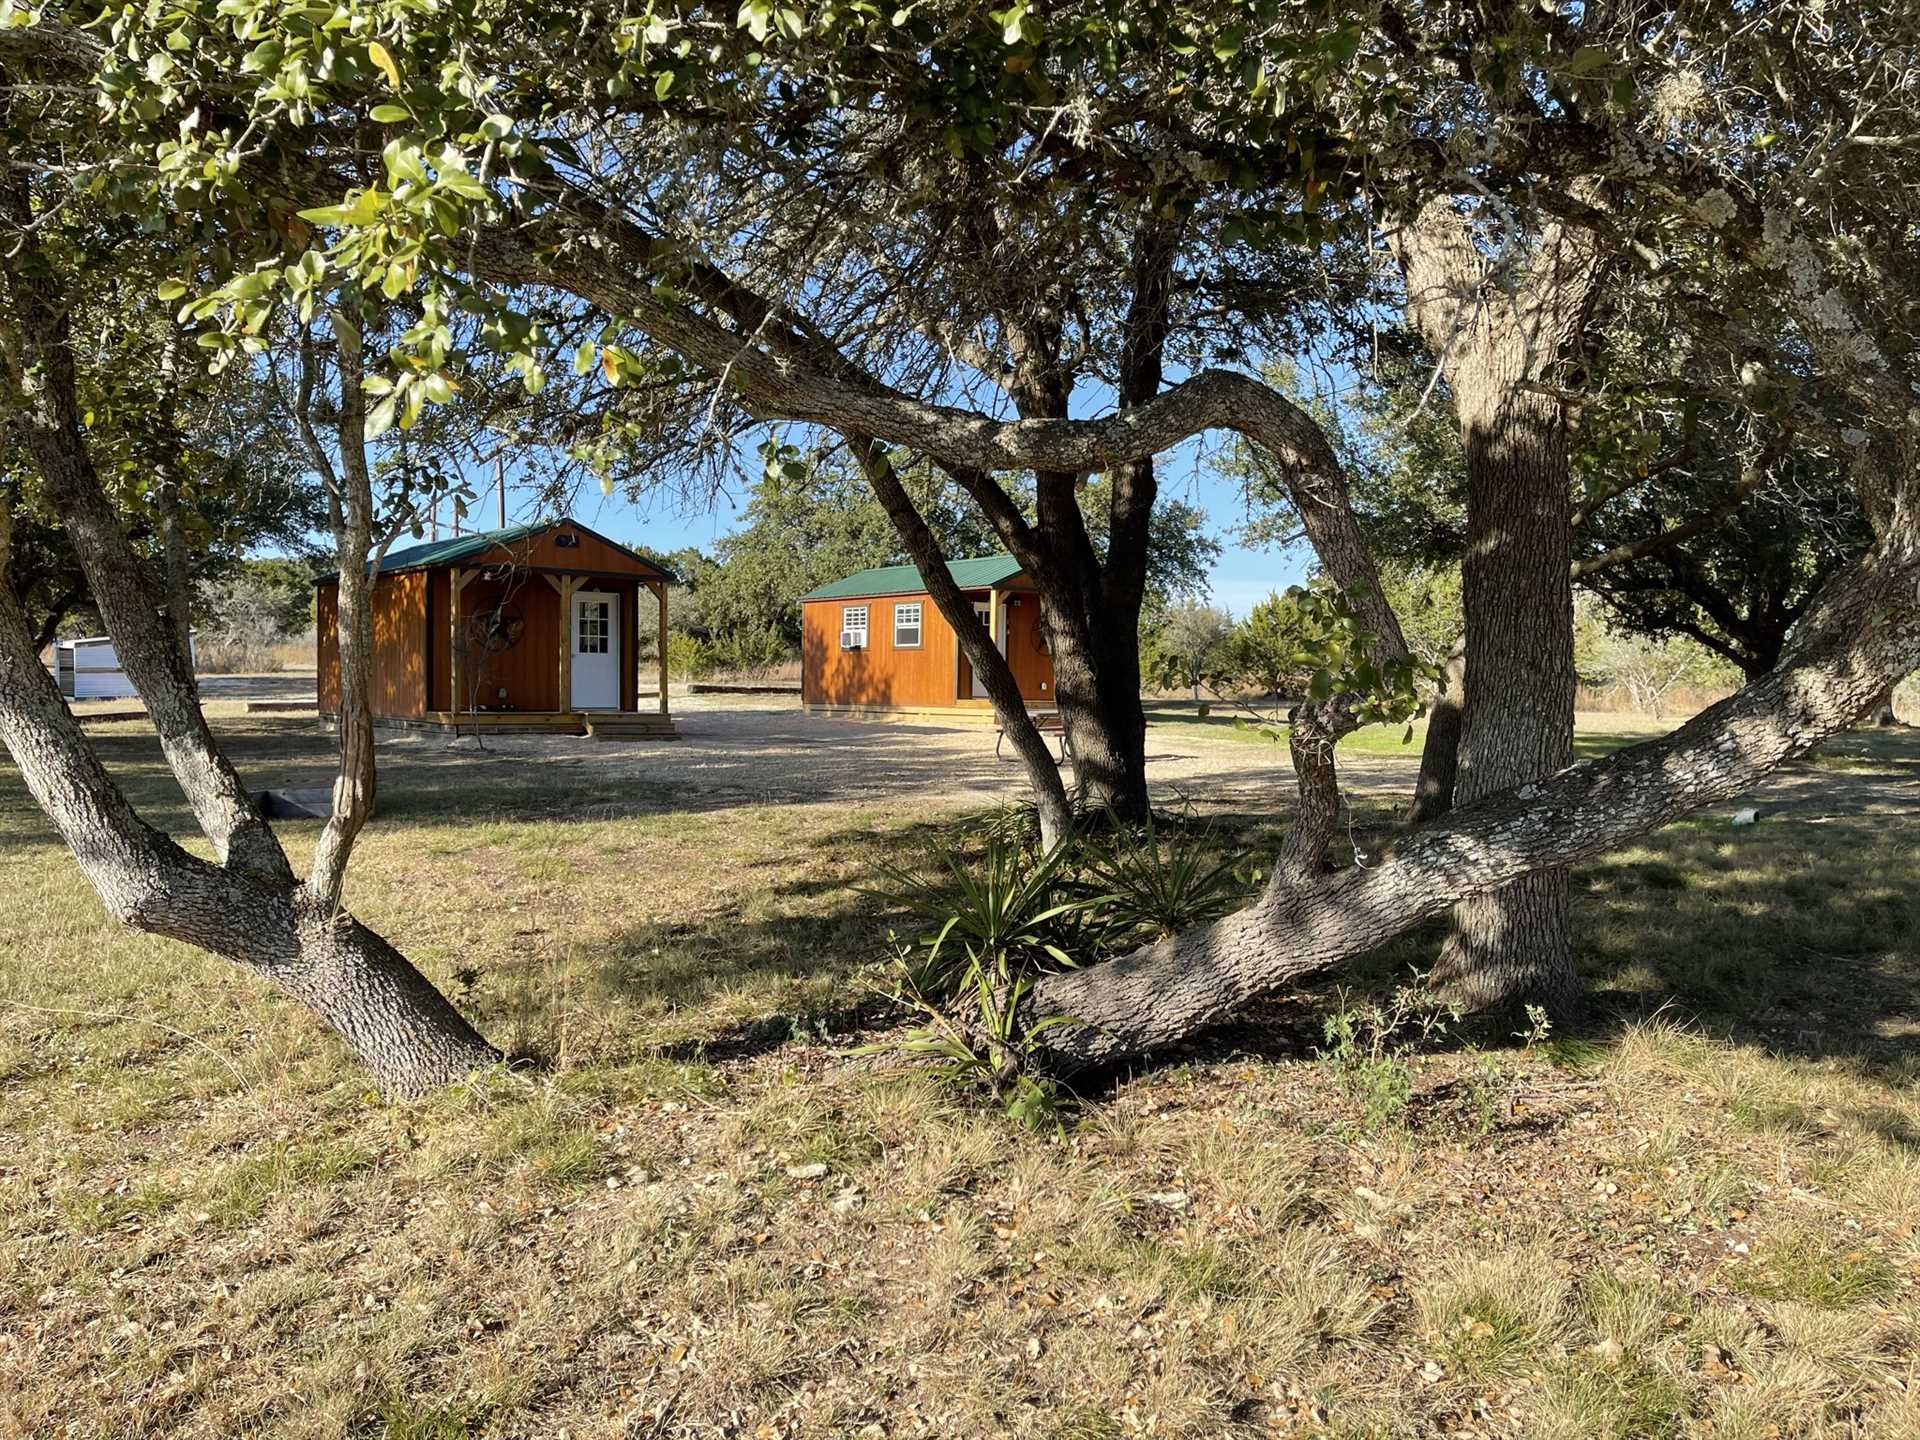                                                 If you need holiday space for up to six people, keep in mind there are two cabins at Great Heart Ranch you can book, ask us for details!